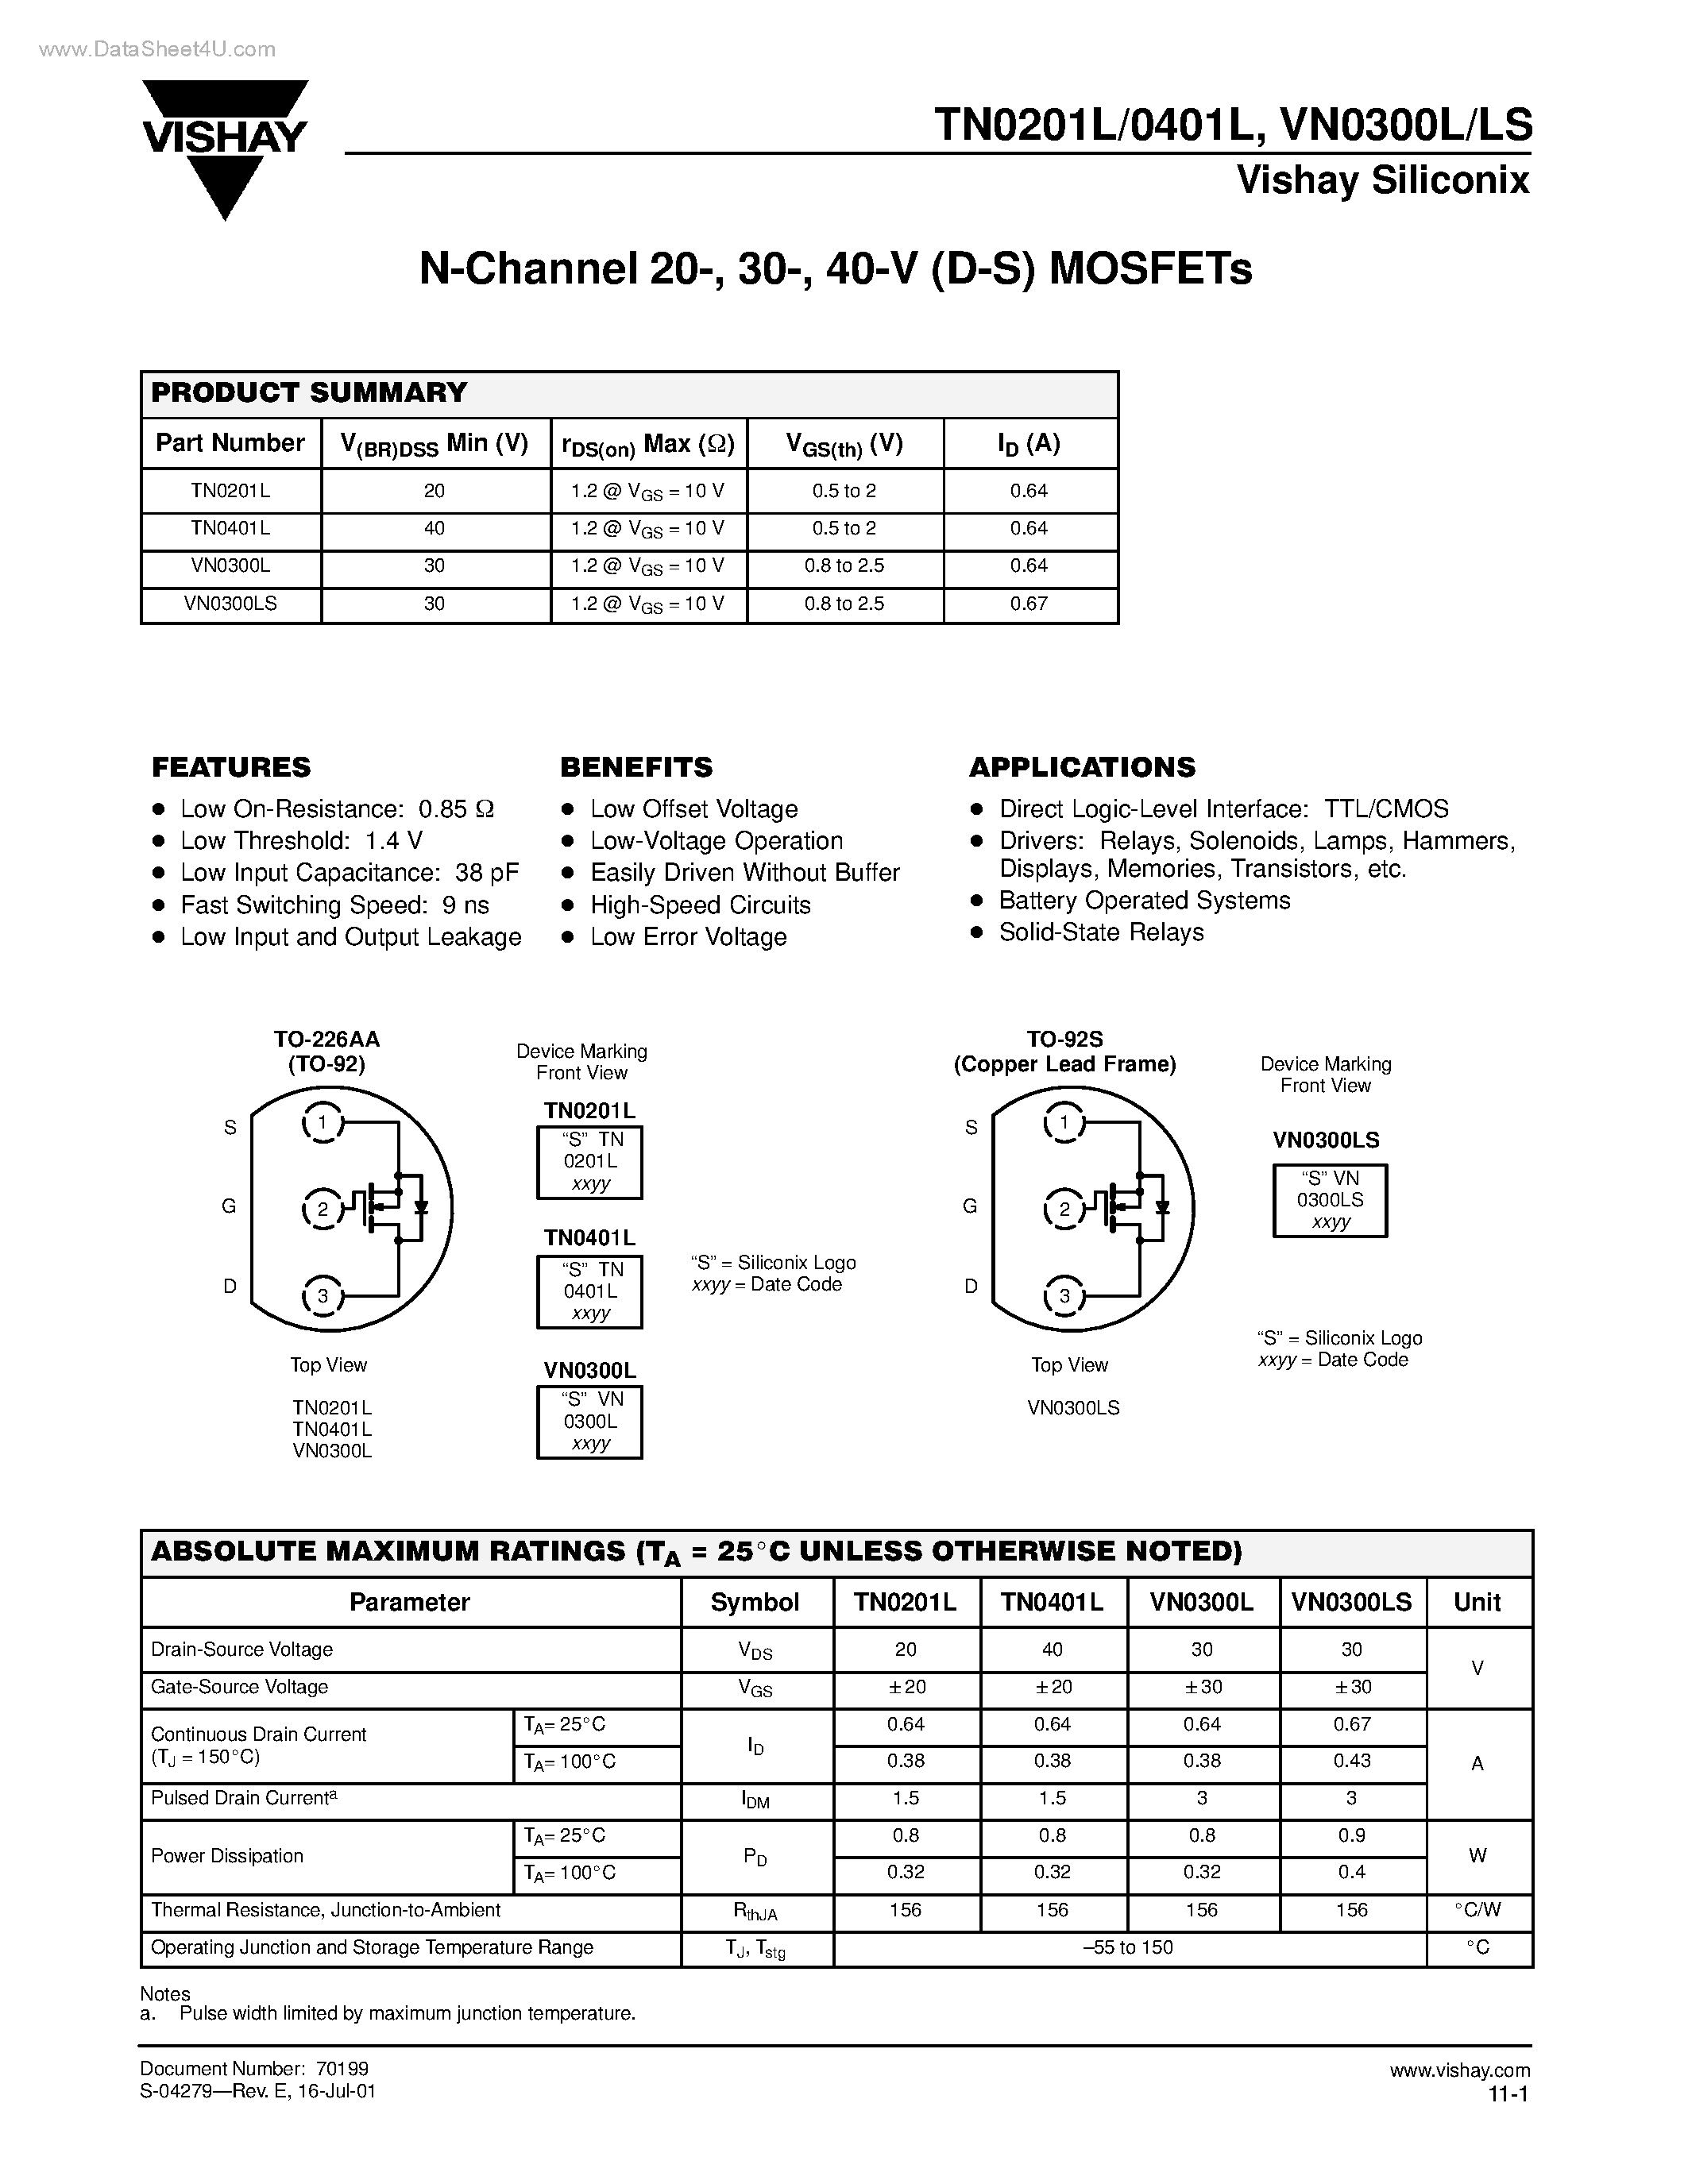 Datasheet VN0300LS - N-Channel 20-/ 30-/ 40-V (D-S) MOSFETs page 1